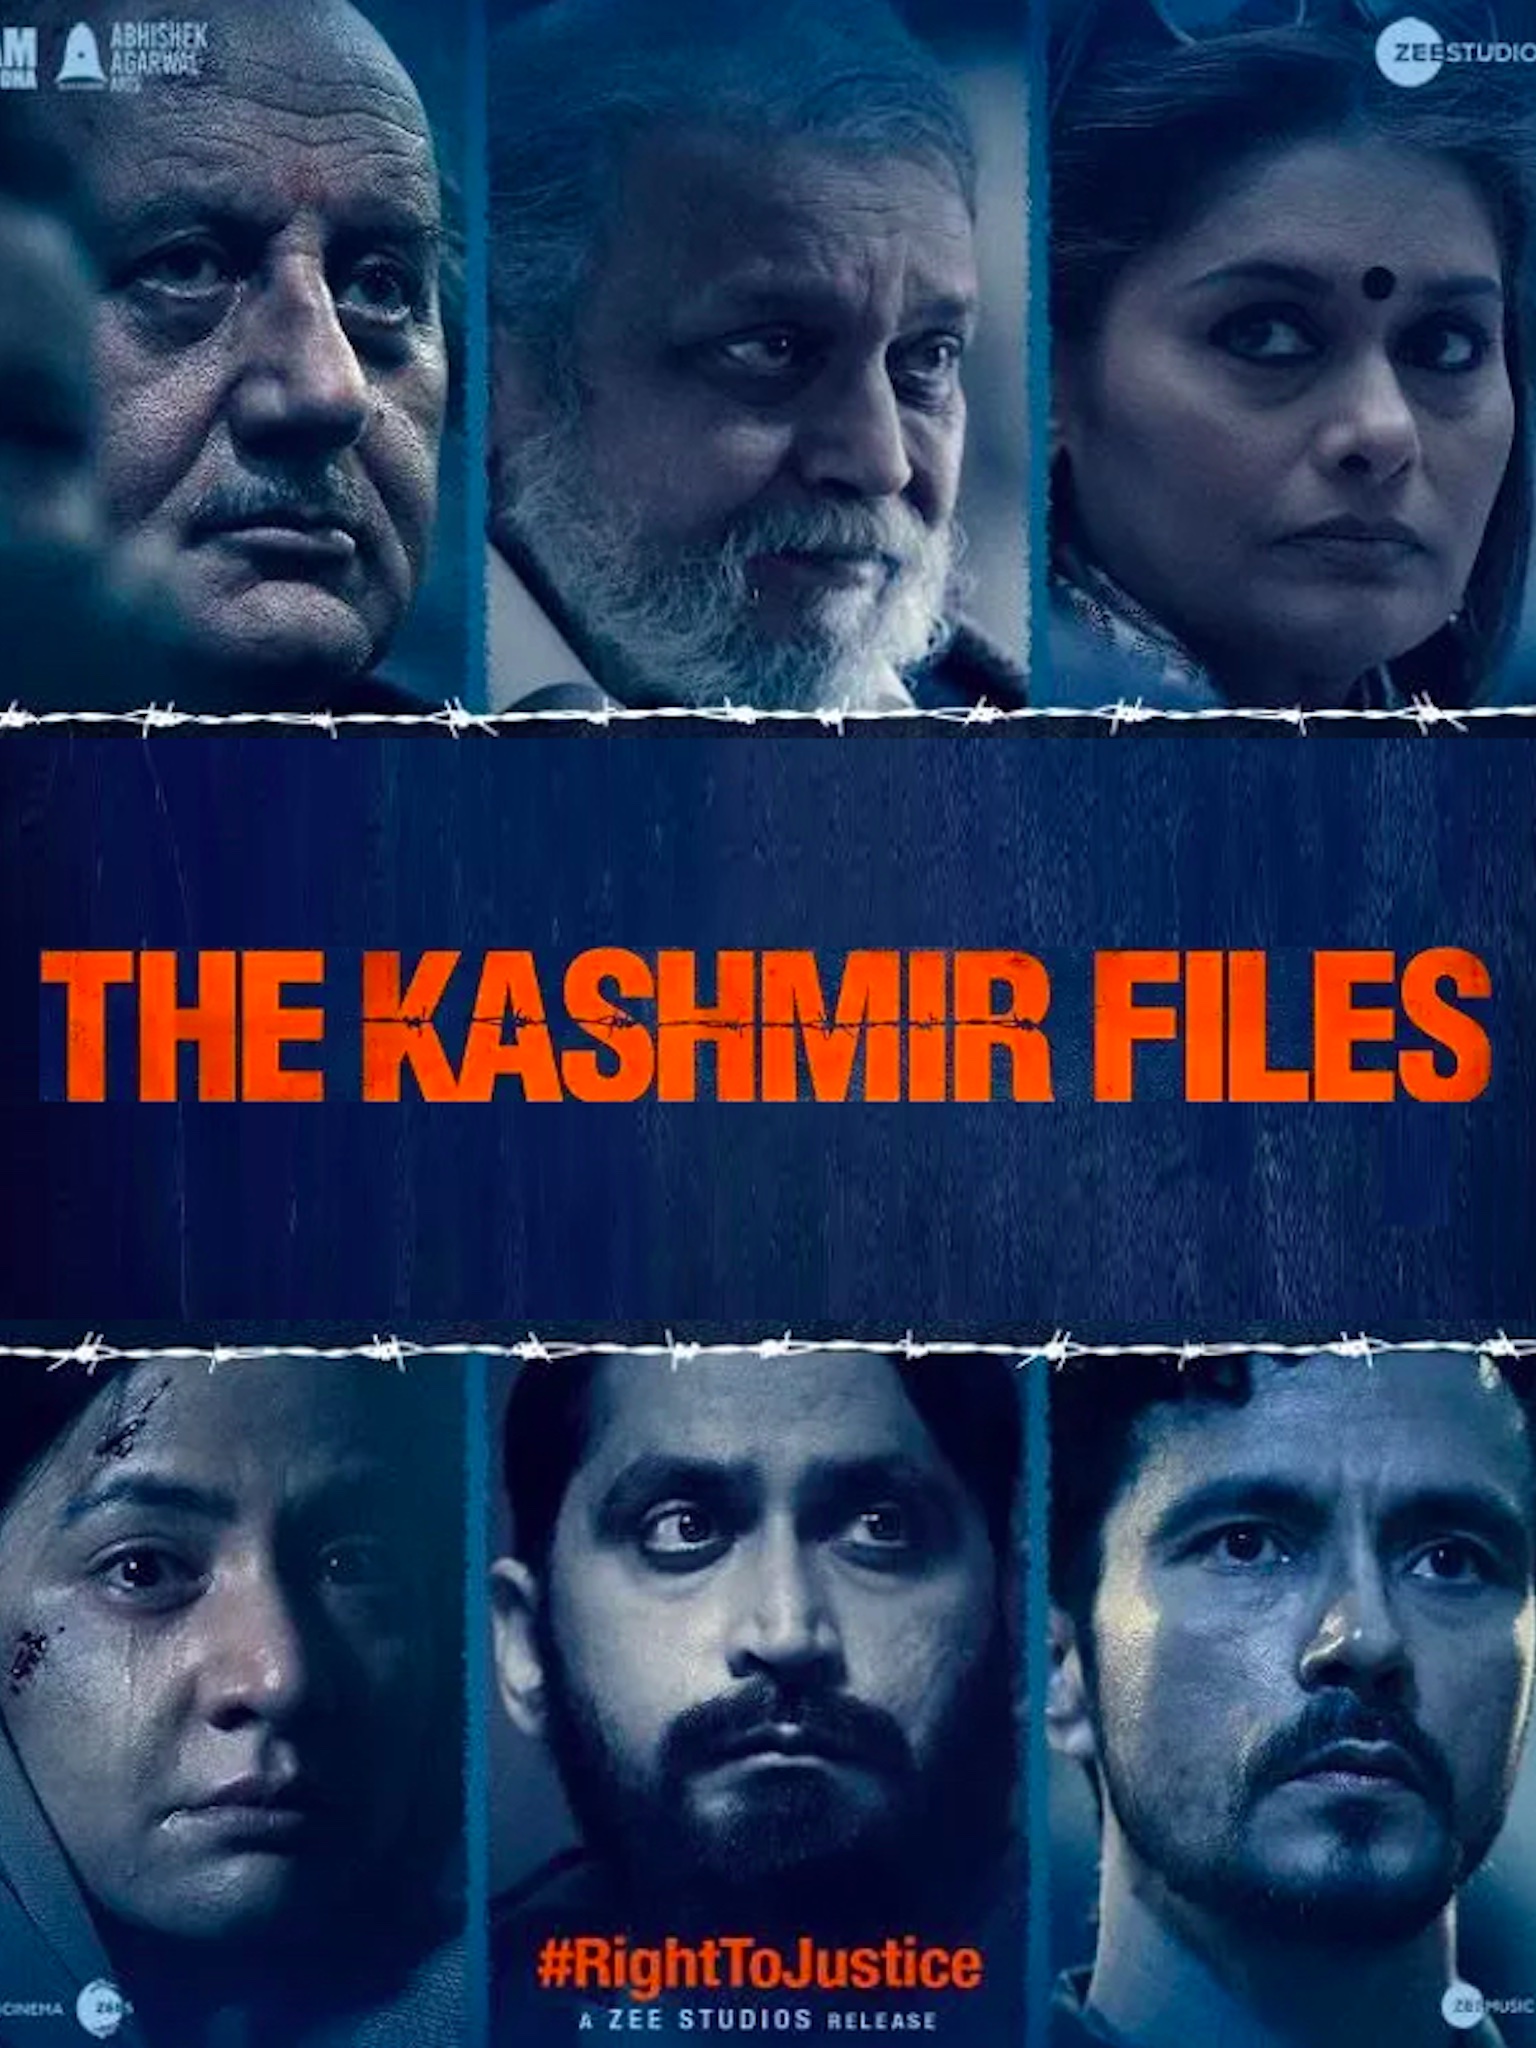 The curious case of The Kashmir Files